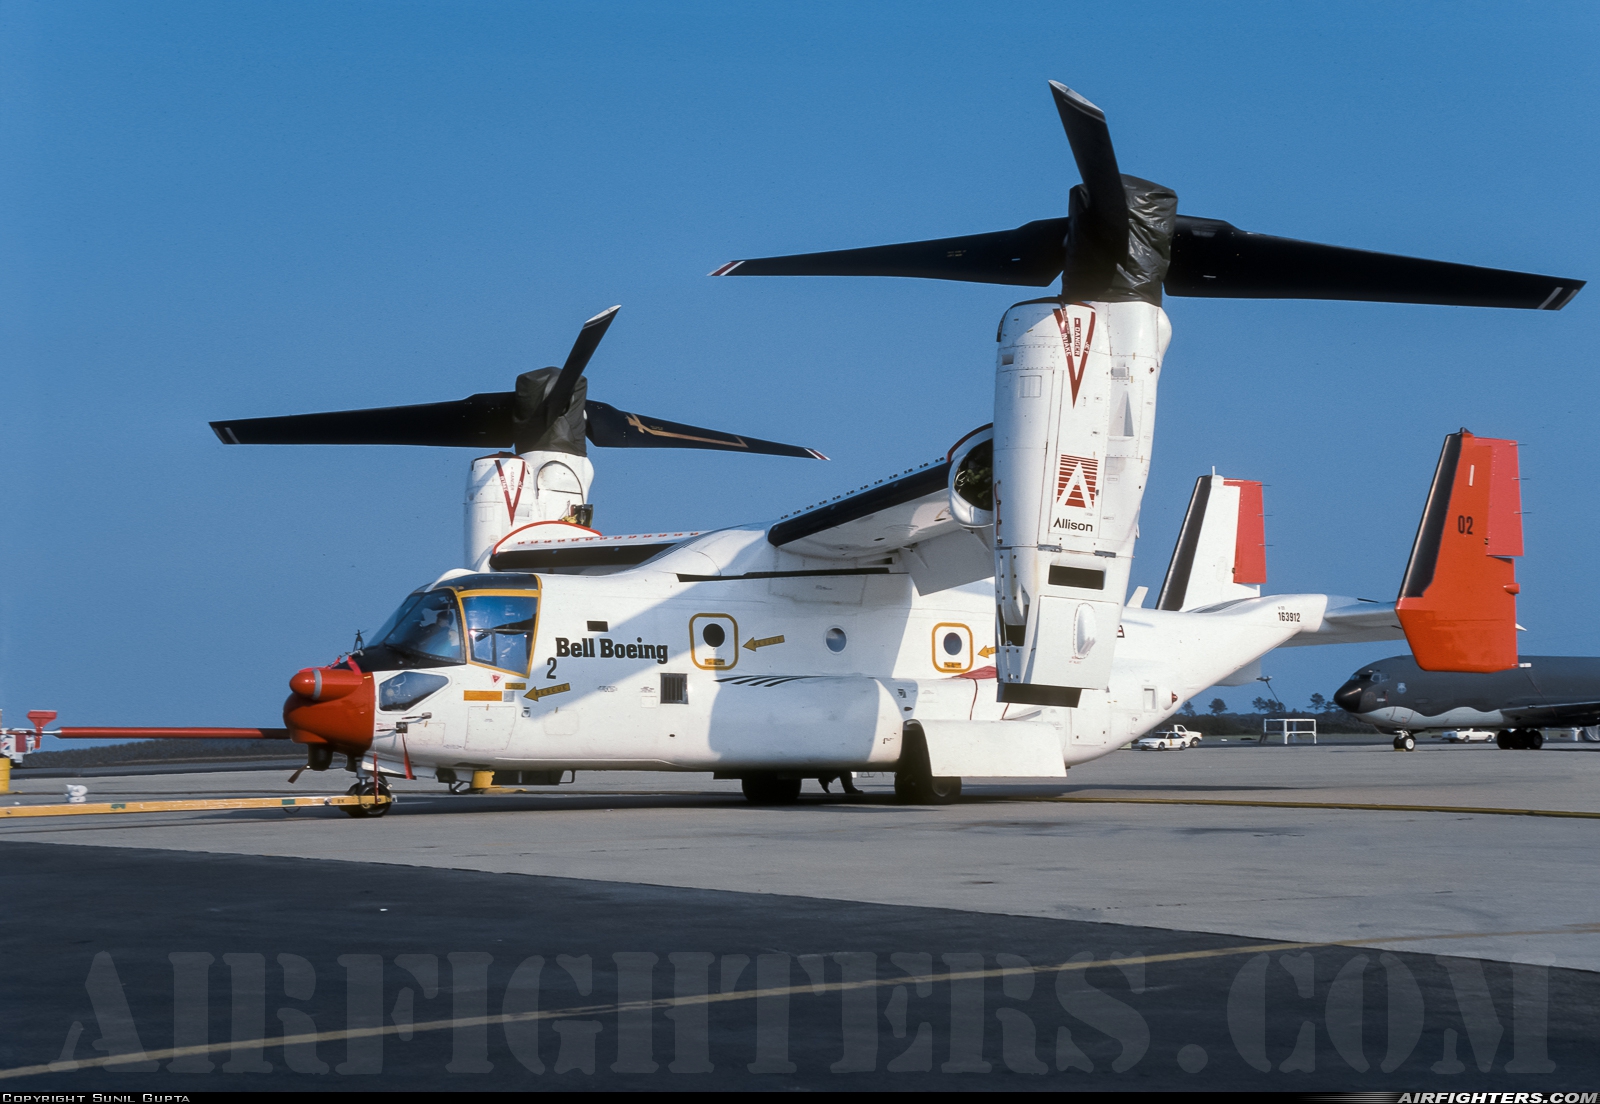 USA - Navy Bell / Boeing V-22 Osprey 163912 at Patuxent River - NAS / Trapnell Field (NHK / KNHK), USA